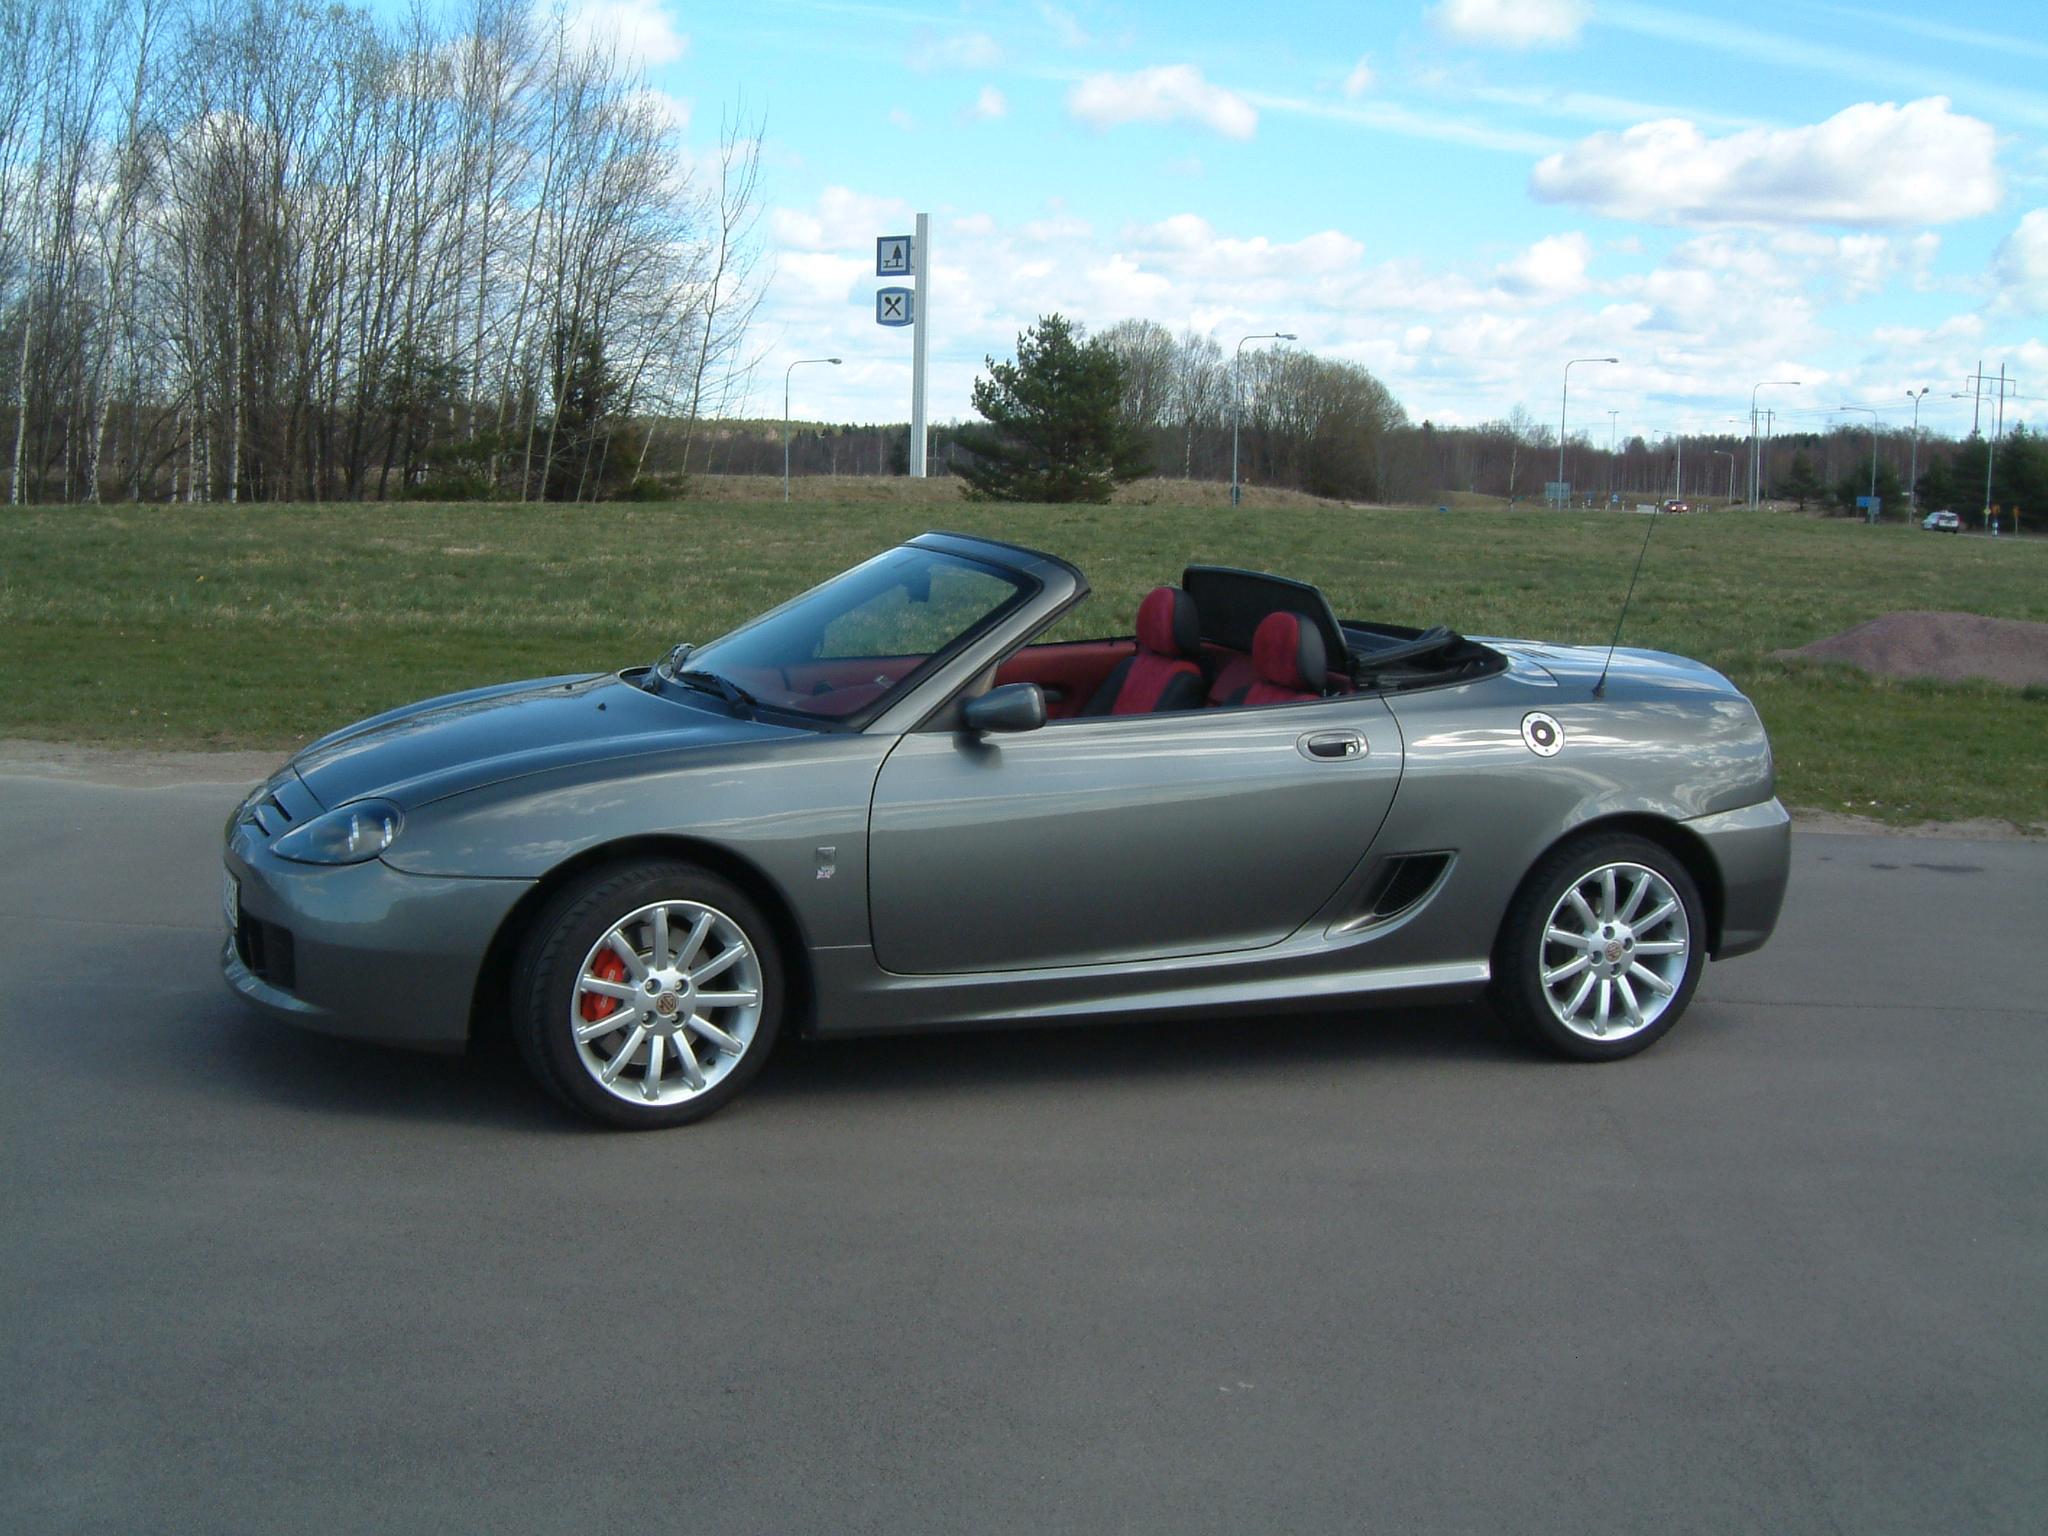 2003 MG TF 160 Roadster picture